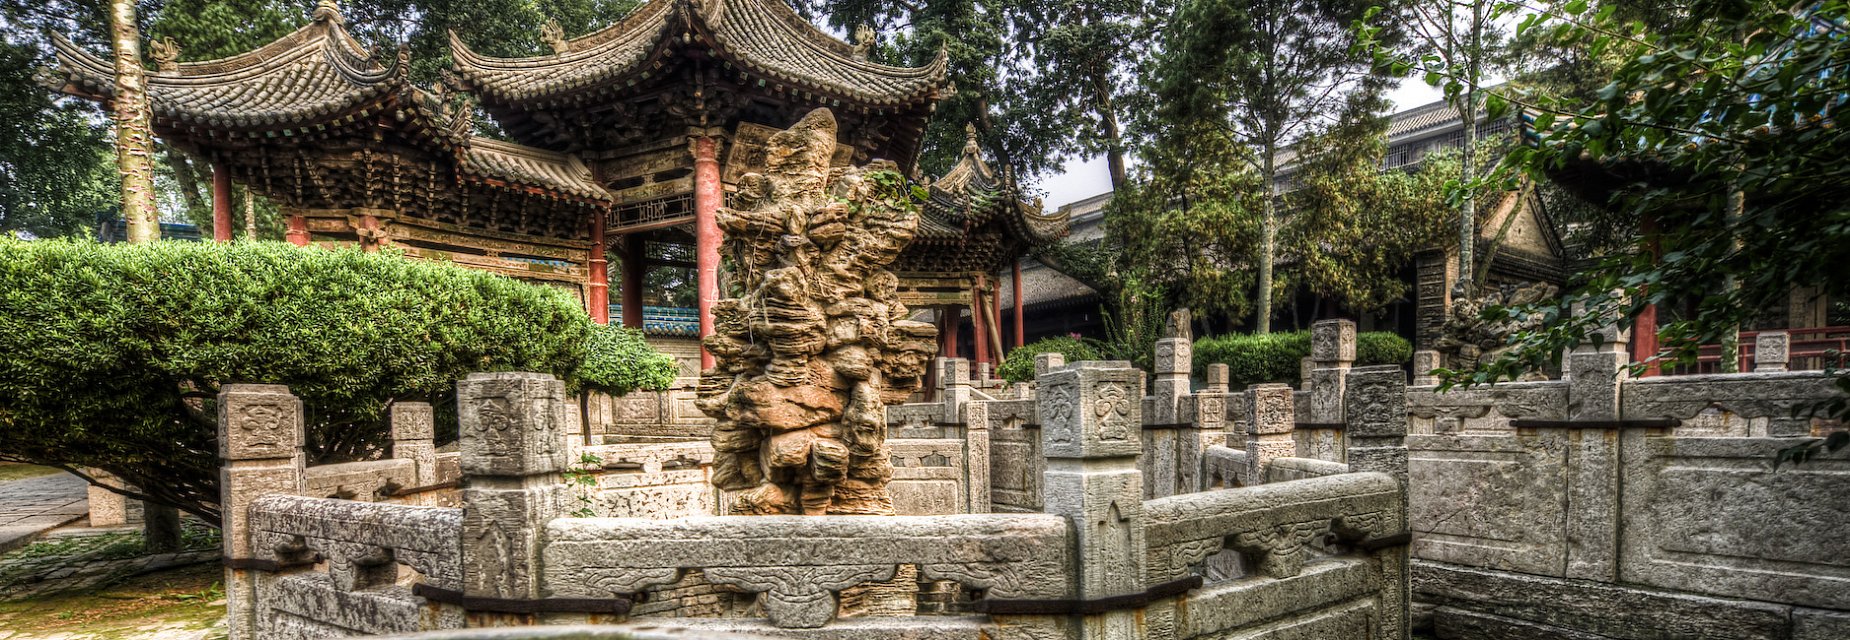 Great Mosque Of Xi'an  Backgrounds, Compatible - PC, Mobile, Gadgets| 1850x640 px